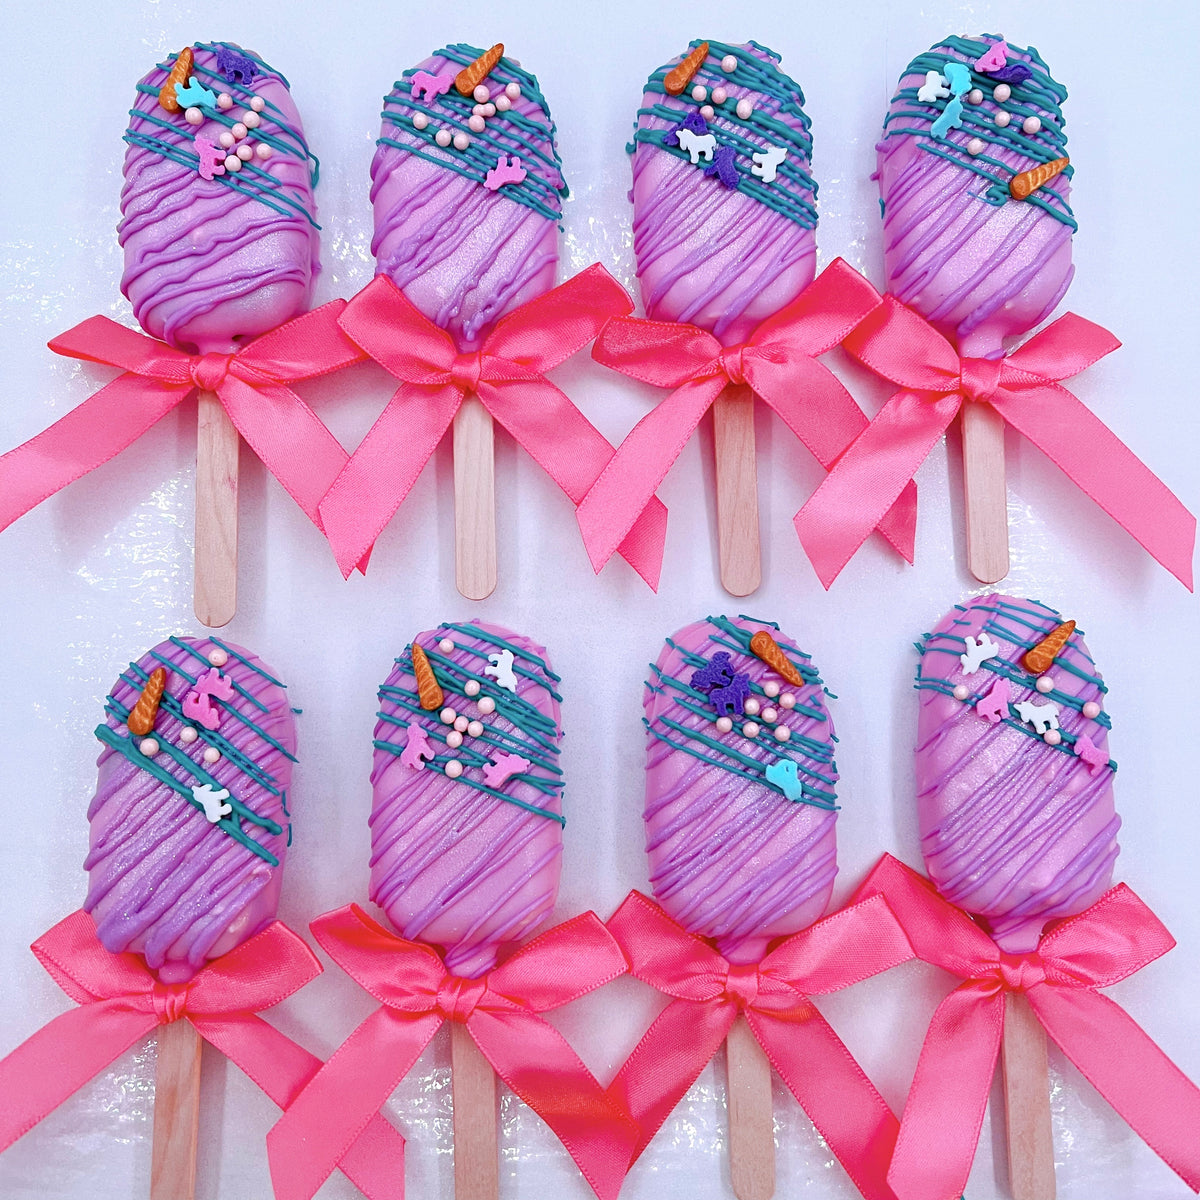 CakePop, Cakesicle and more on Instagram: Pretty cakesicles in sweet  pastels 🌸 All set in cute individual packaging 🥰 Thank you for the order.  . . #cakesicles #cake #cakedesign #cakedecorating #cakeart  #cakelover#chocolatelover #